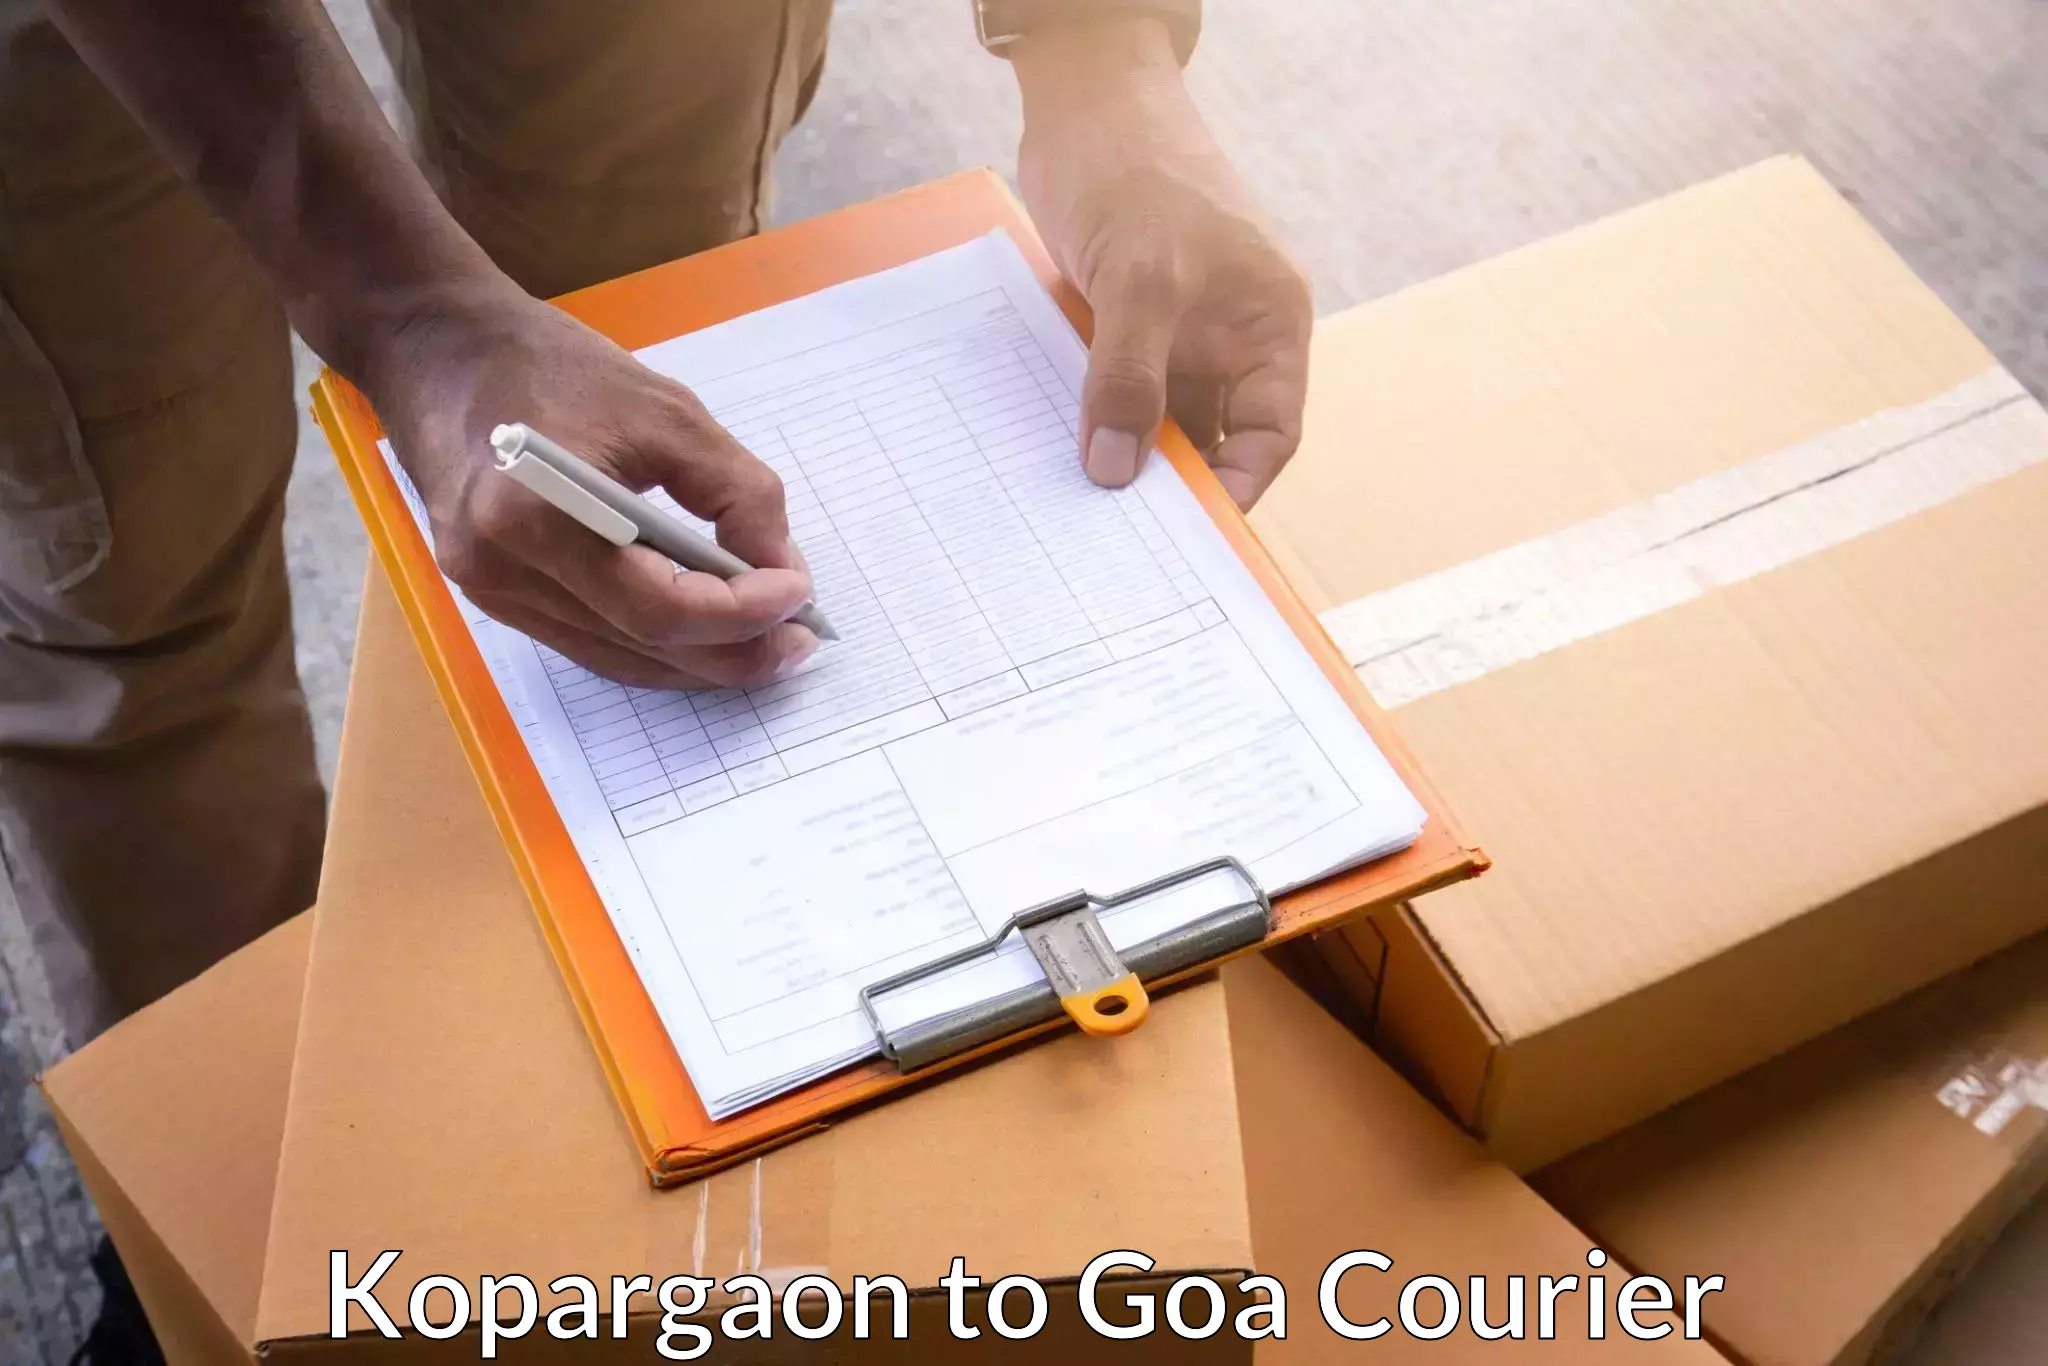 Package delivery network Kopargaon to Margao